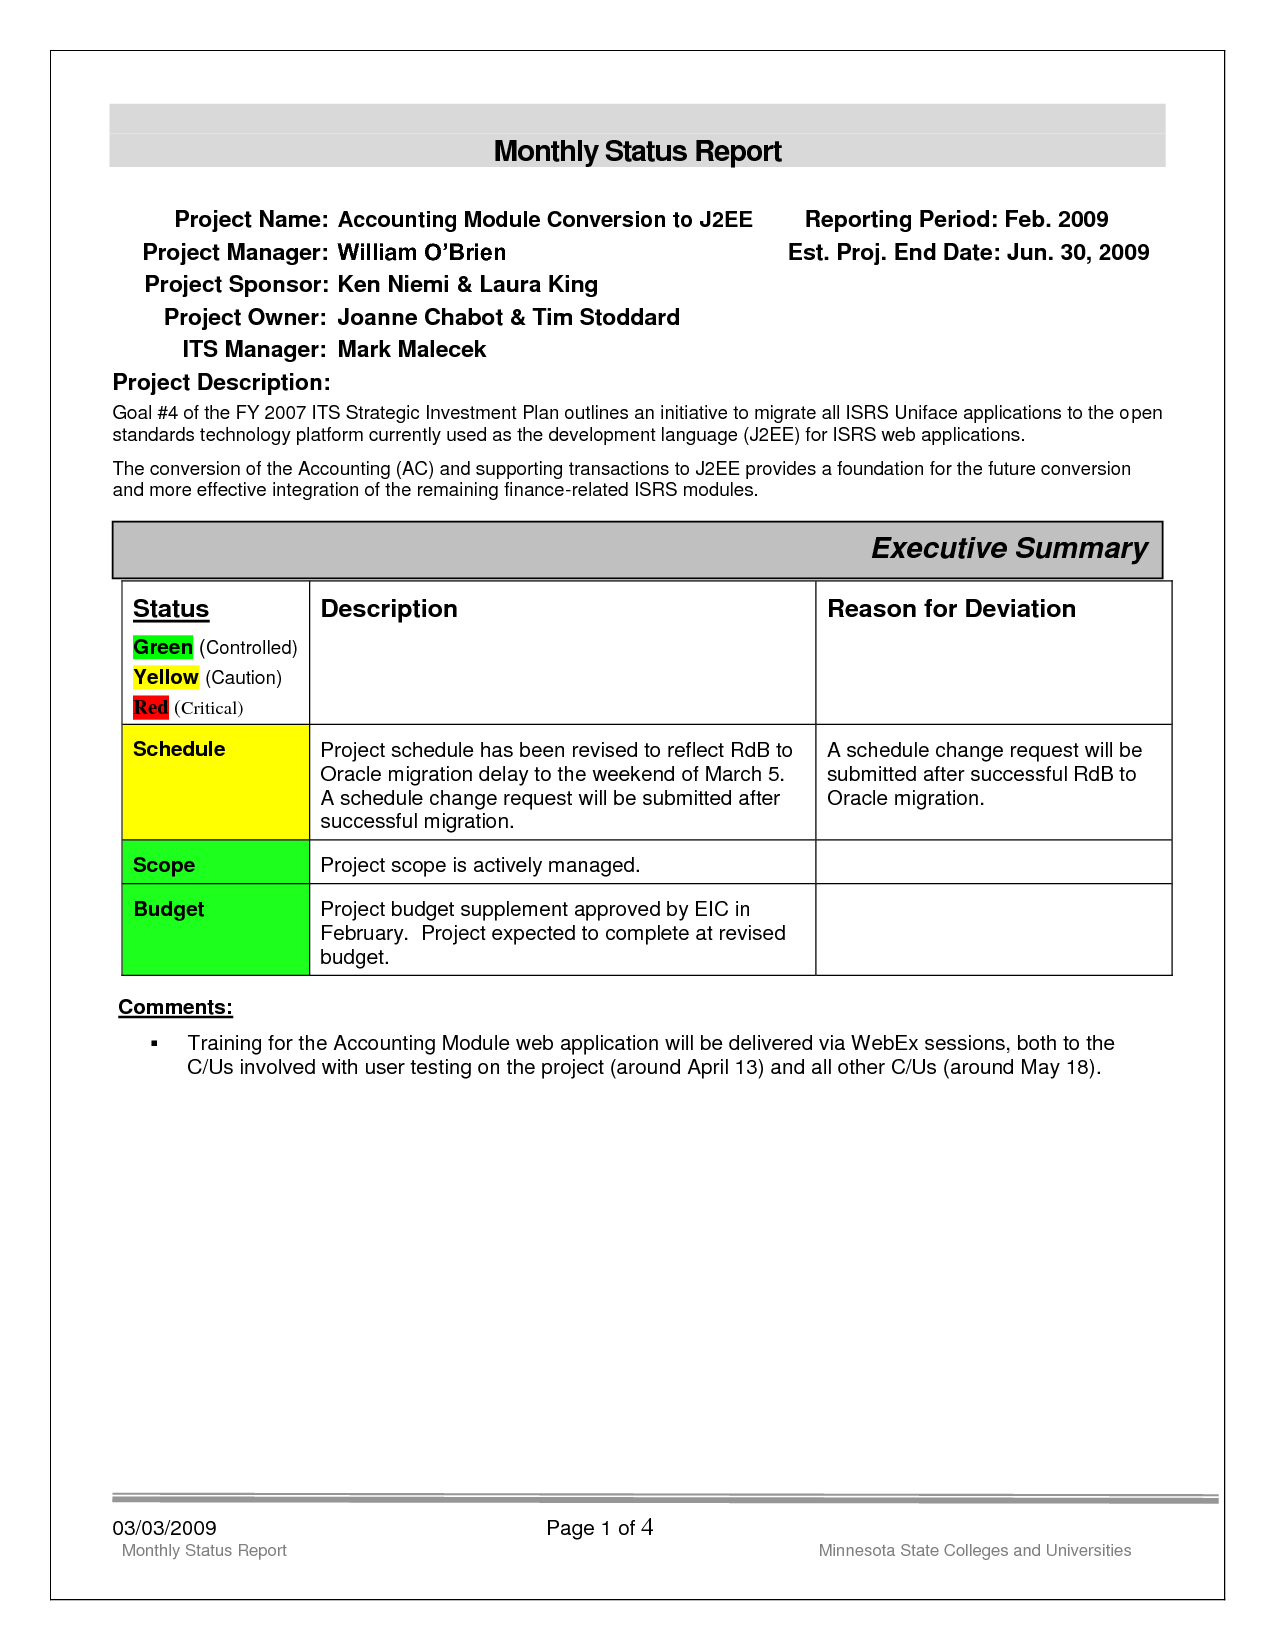 Replacethis] Monthly Status Report Template Format And Throughout Training Report Template Format